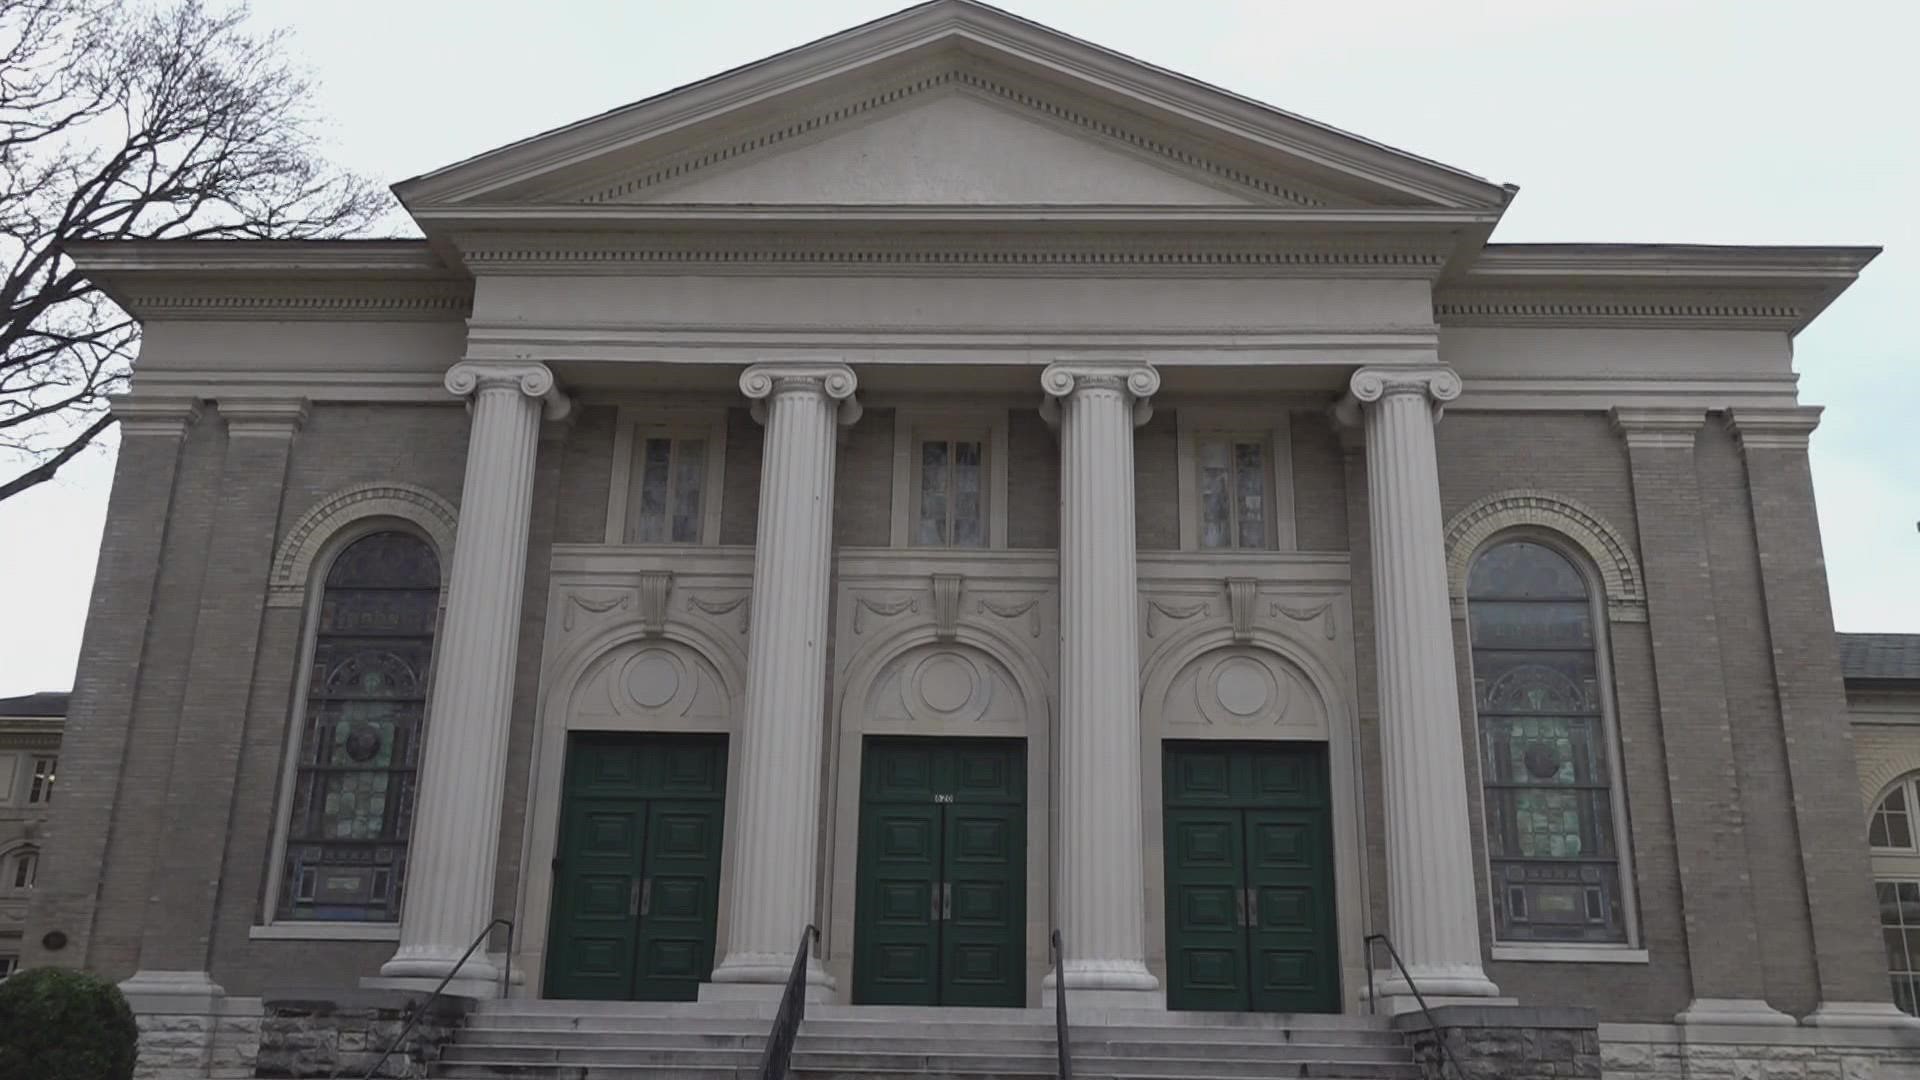 The executive director of the Knoxville History Project said it was one of the first churches founded in the 1790s.